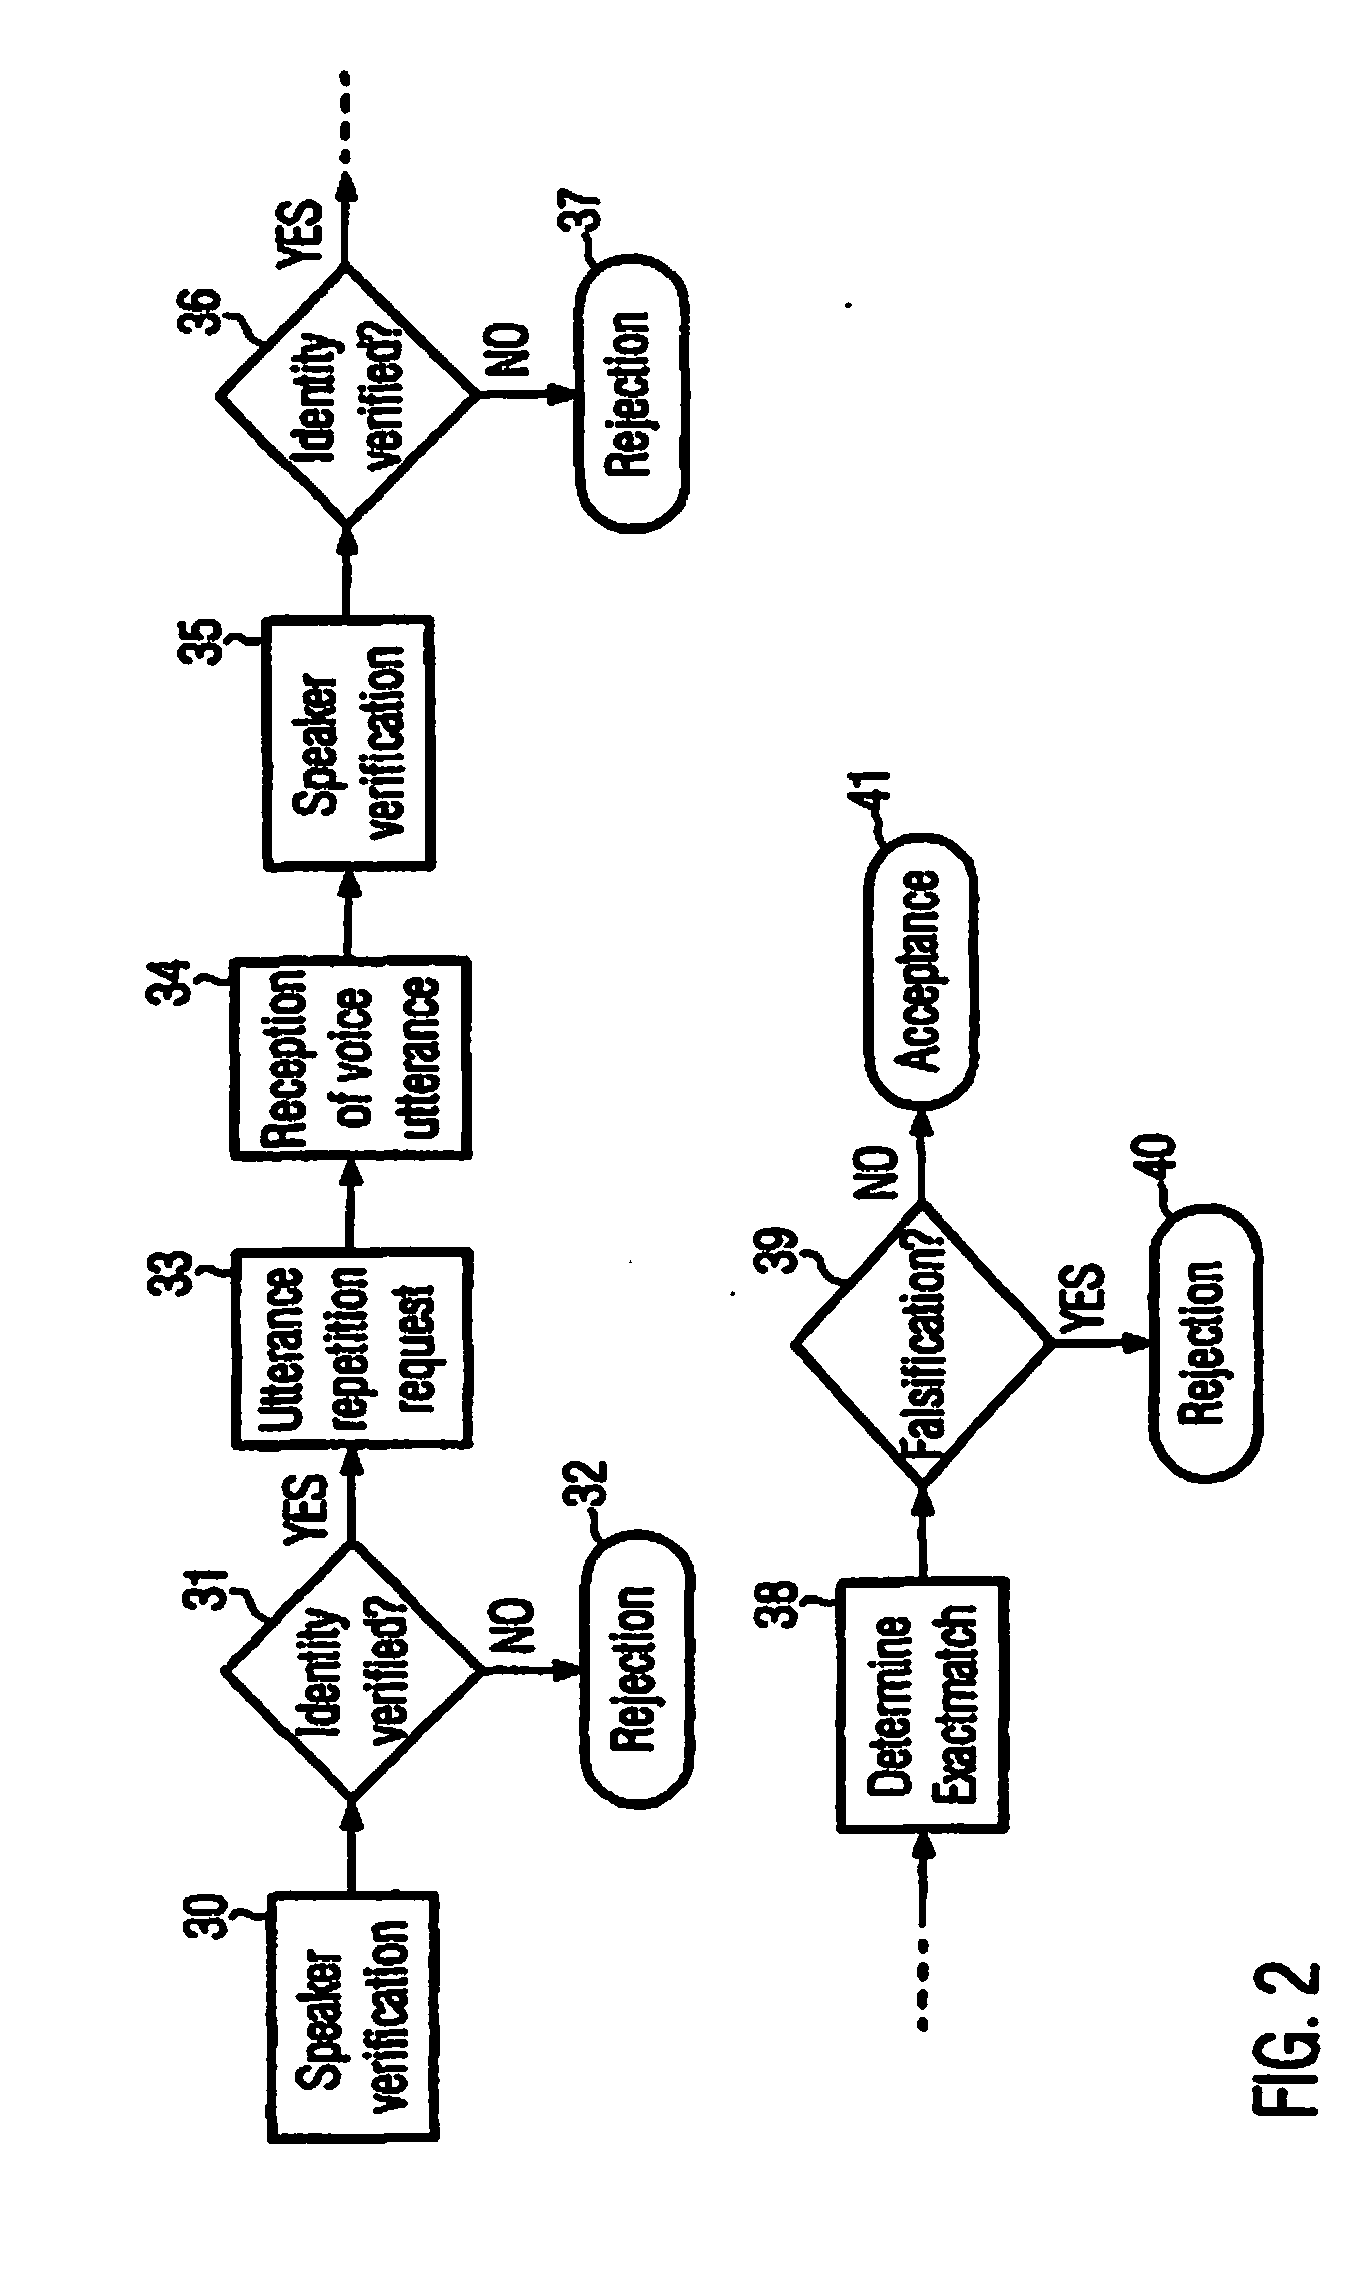 Method for verifying the identity of a speaker and related computer readable medium and computer